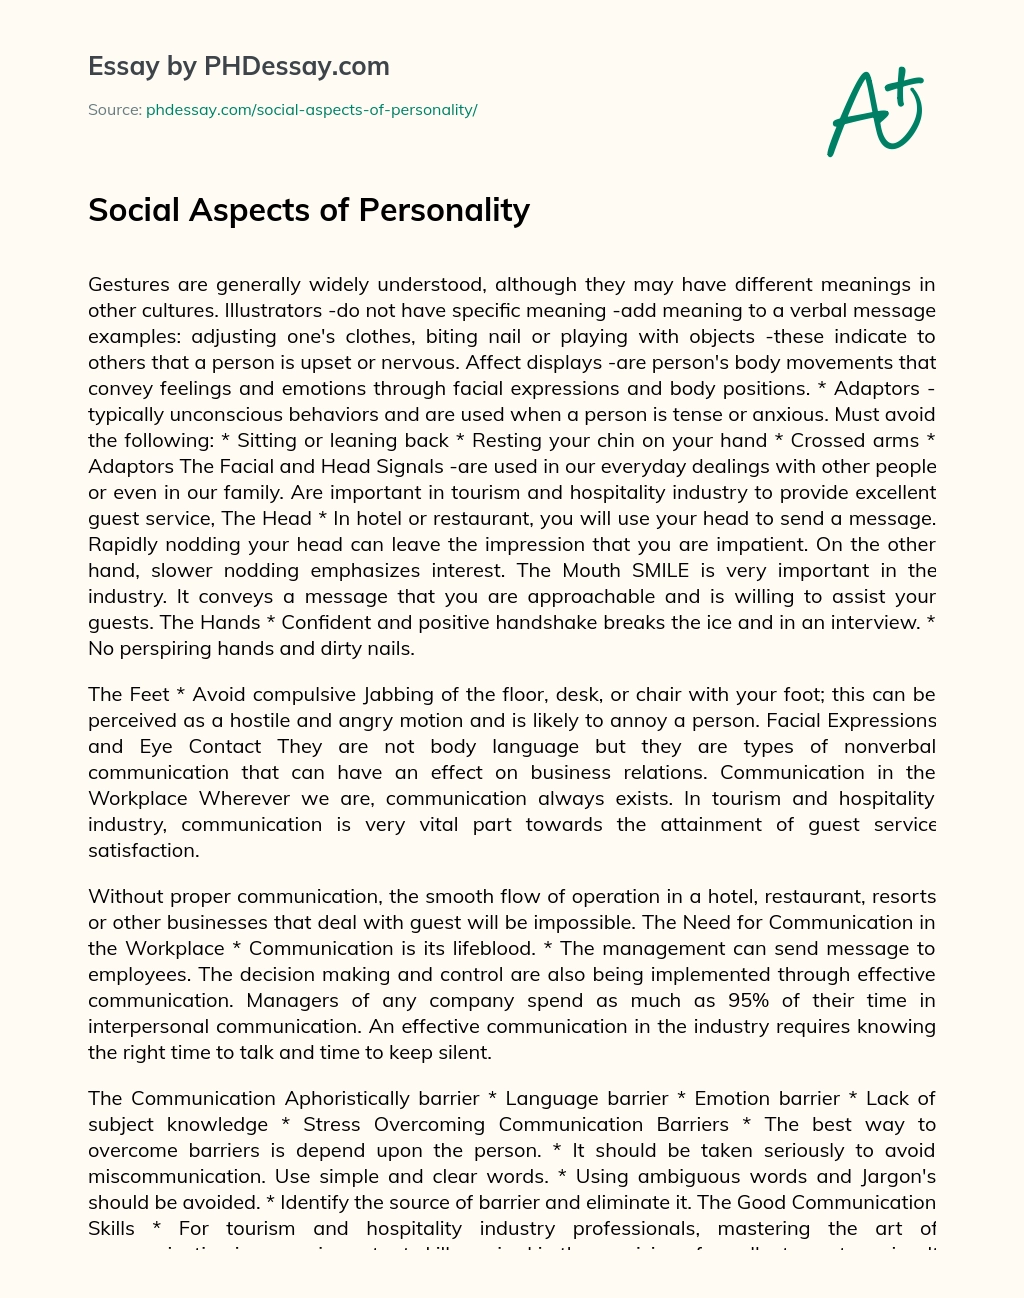 Social Aspects of Personality essay